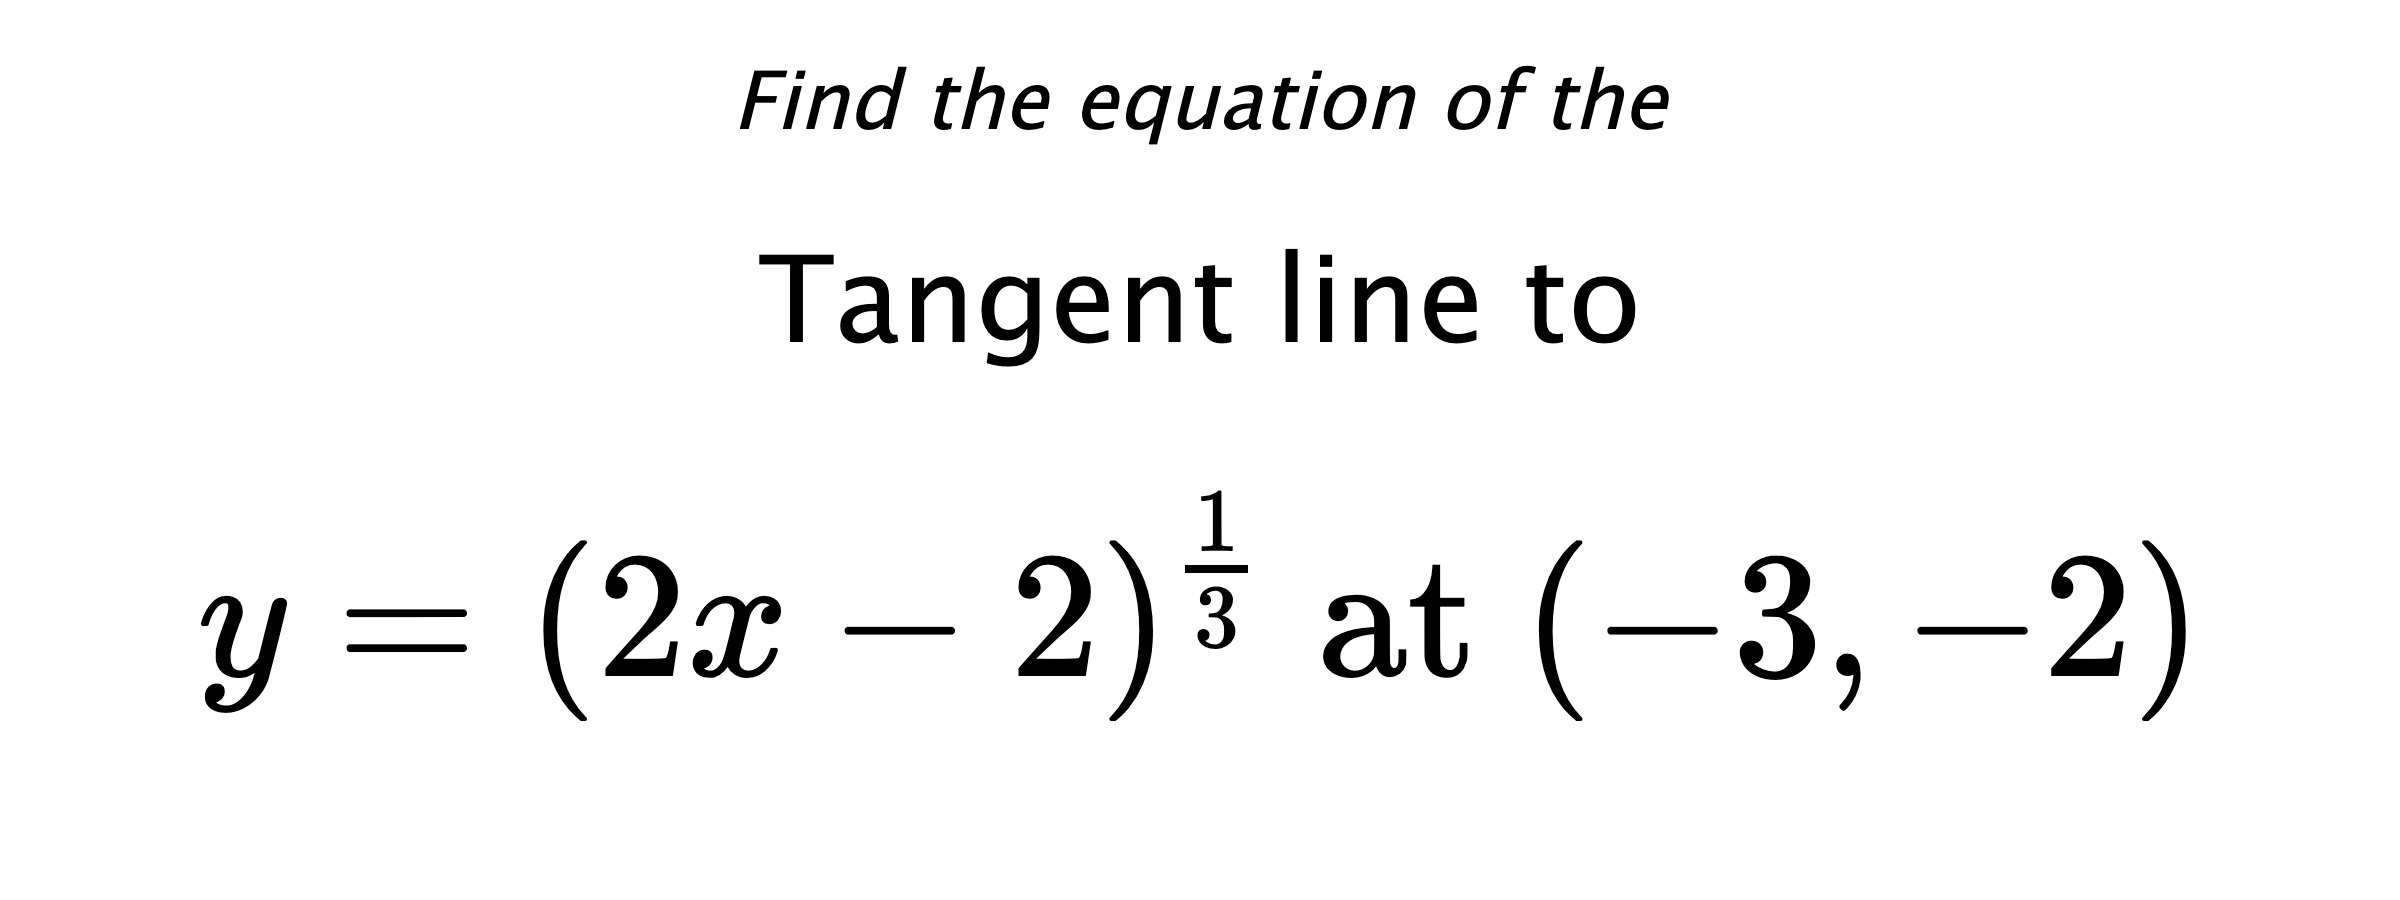 Find the equation of the Tangent line to $$ y=(2x-2)^{\frac{1}{3}} \text{ at } (-3,-2) $$